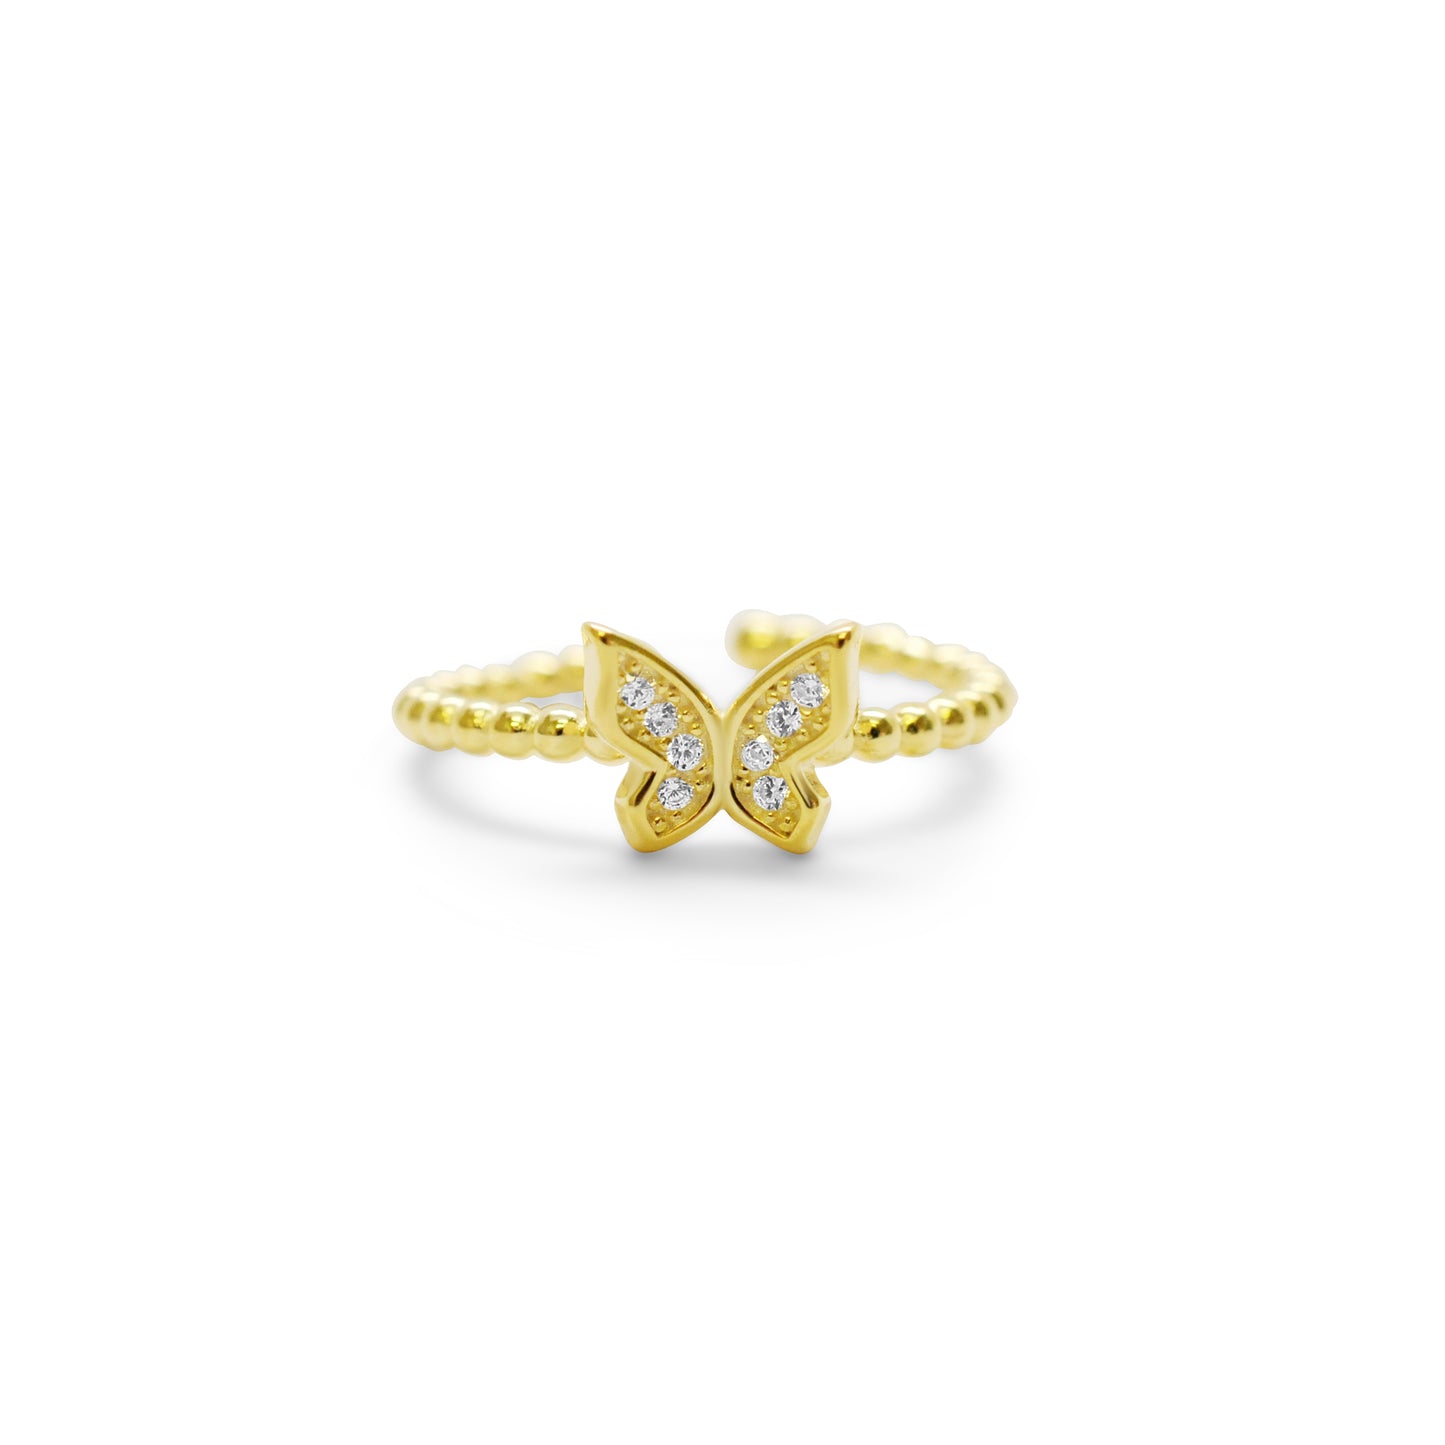 IT FITS - Spread Your Wings Butterfly Droplet Ring